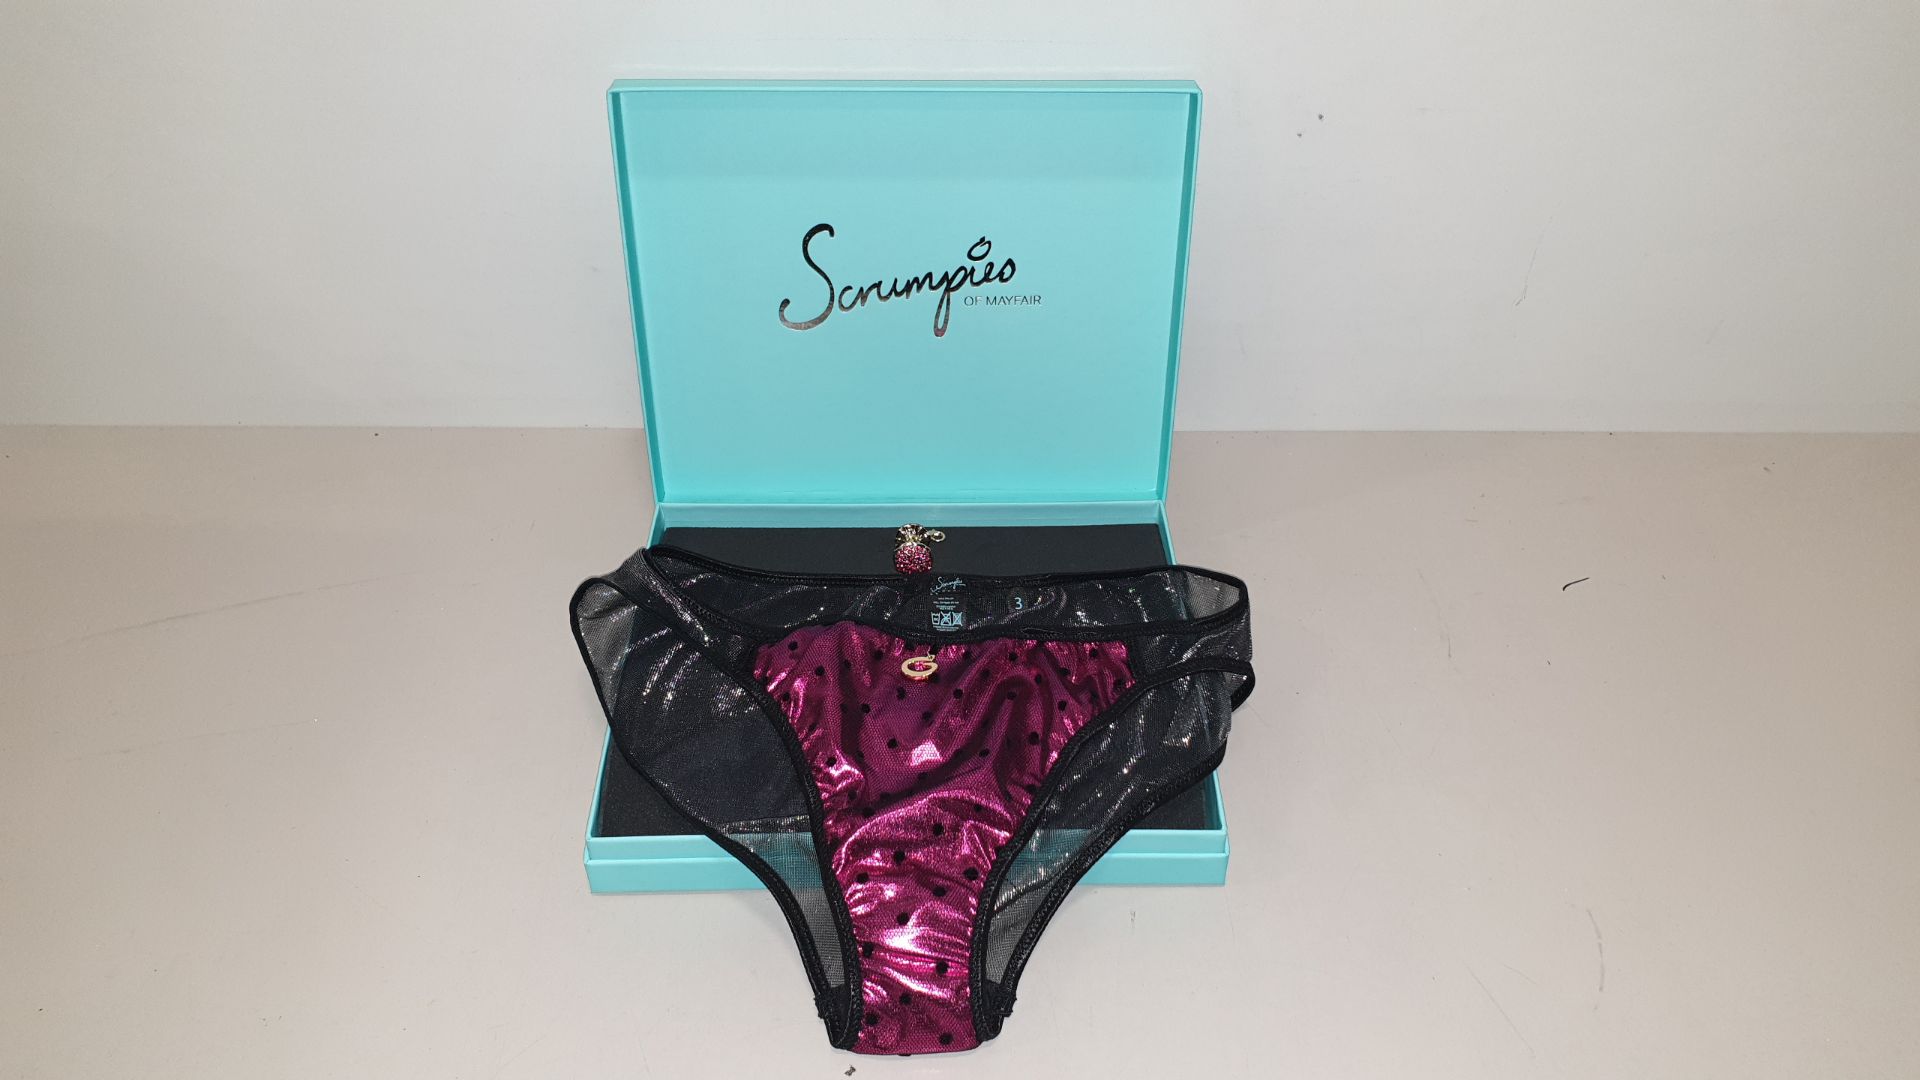 50 X SCRUMPIES OF MAYFAIR PINK LADY TANGA BRIEFS - SIZES 12-14 (3-4) WITH BAG OF 50 CHARMS AND 25